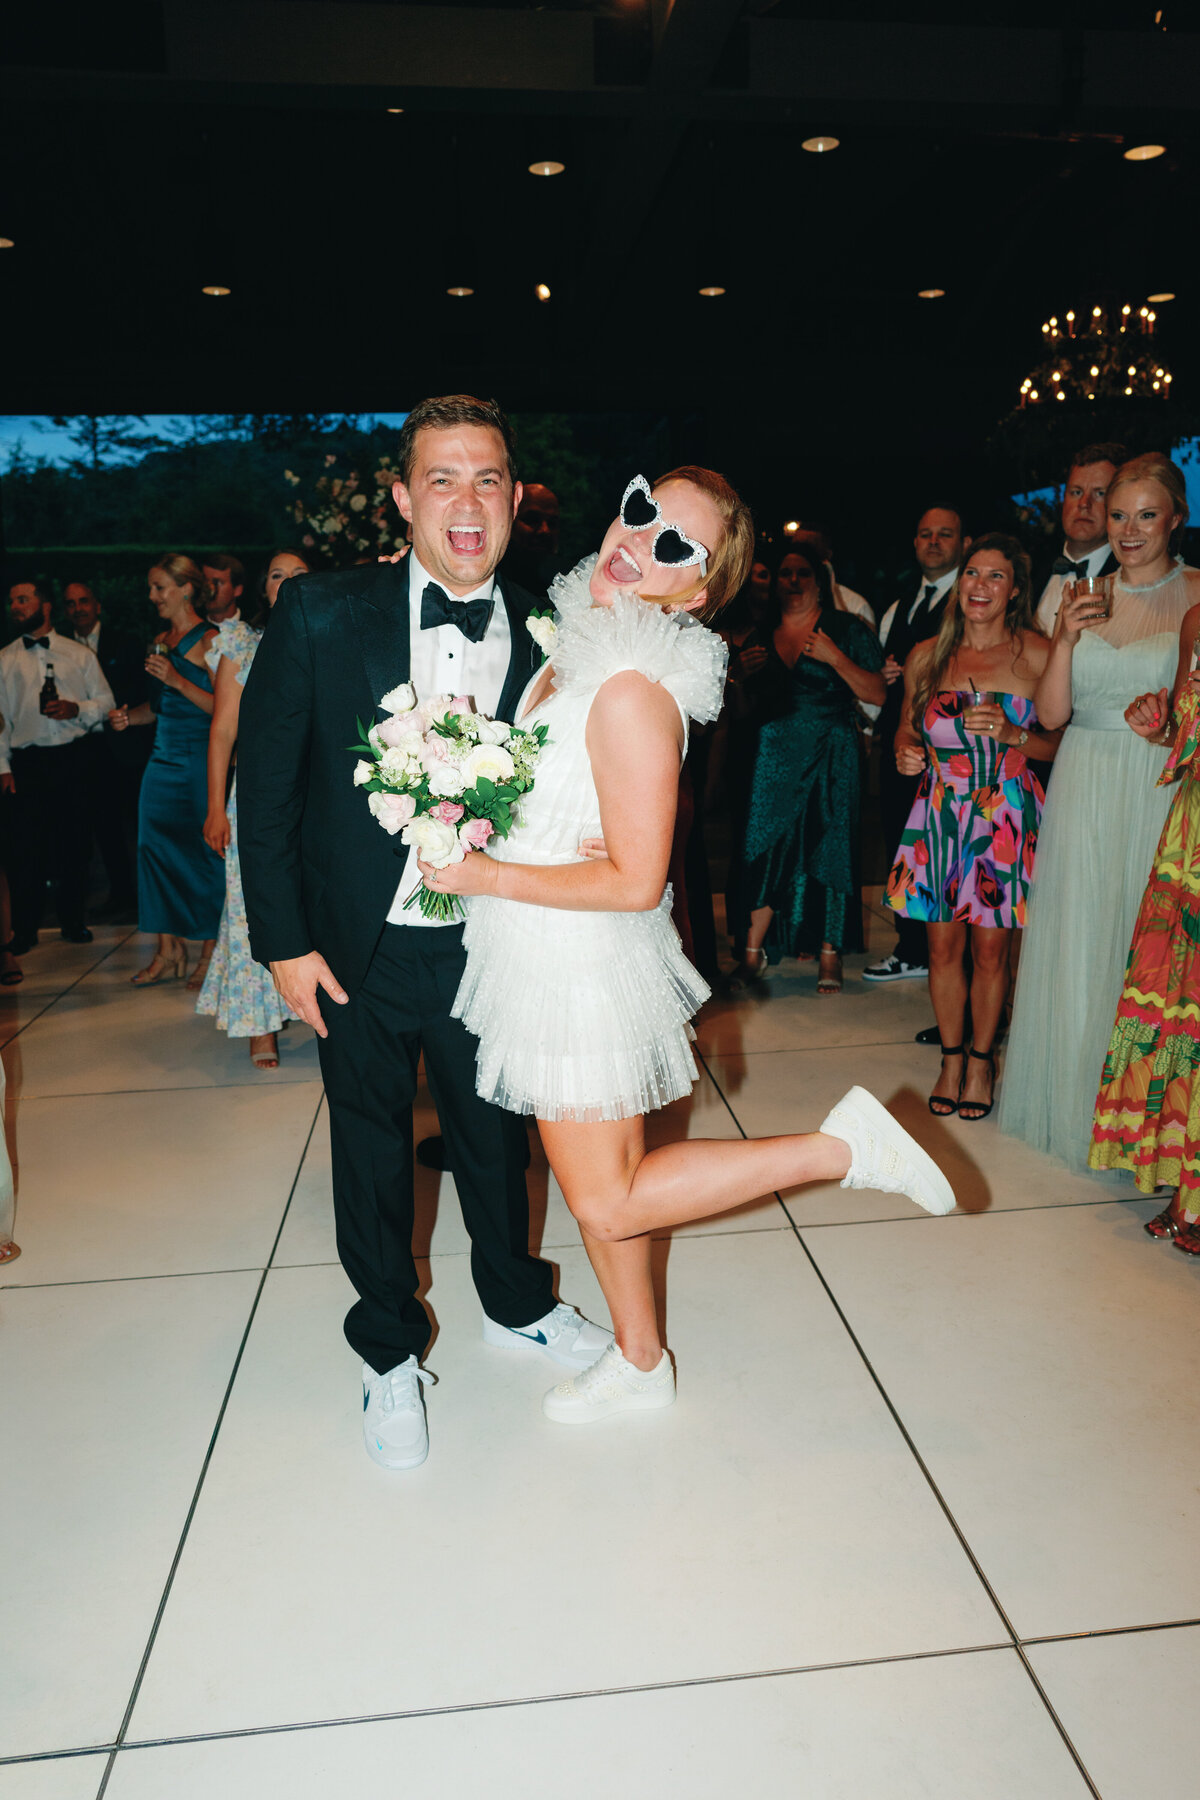 The party begins at summer destination wedding reception at the Farm at Old Edwards. All white dance floor and live band. Destination wedding photographer. Kailee DiMeglio Photography.